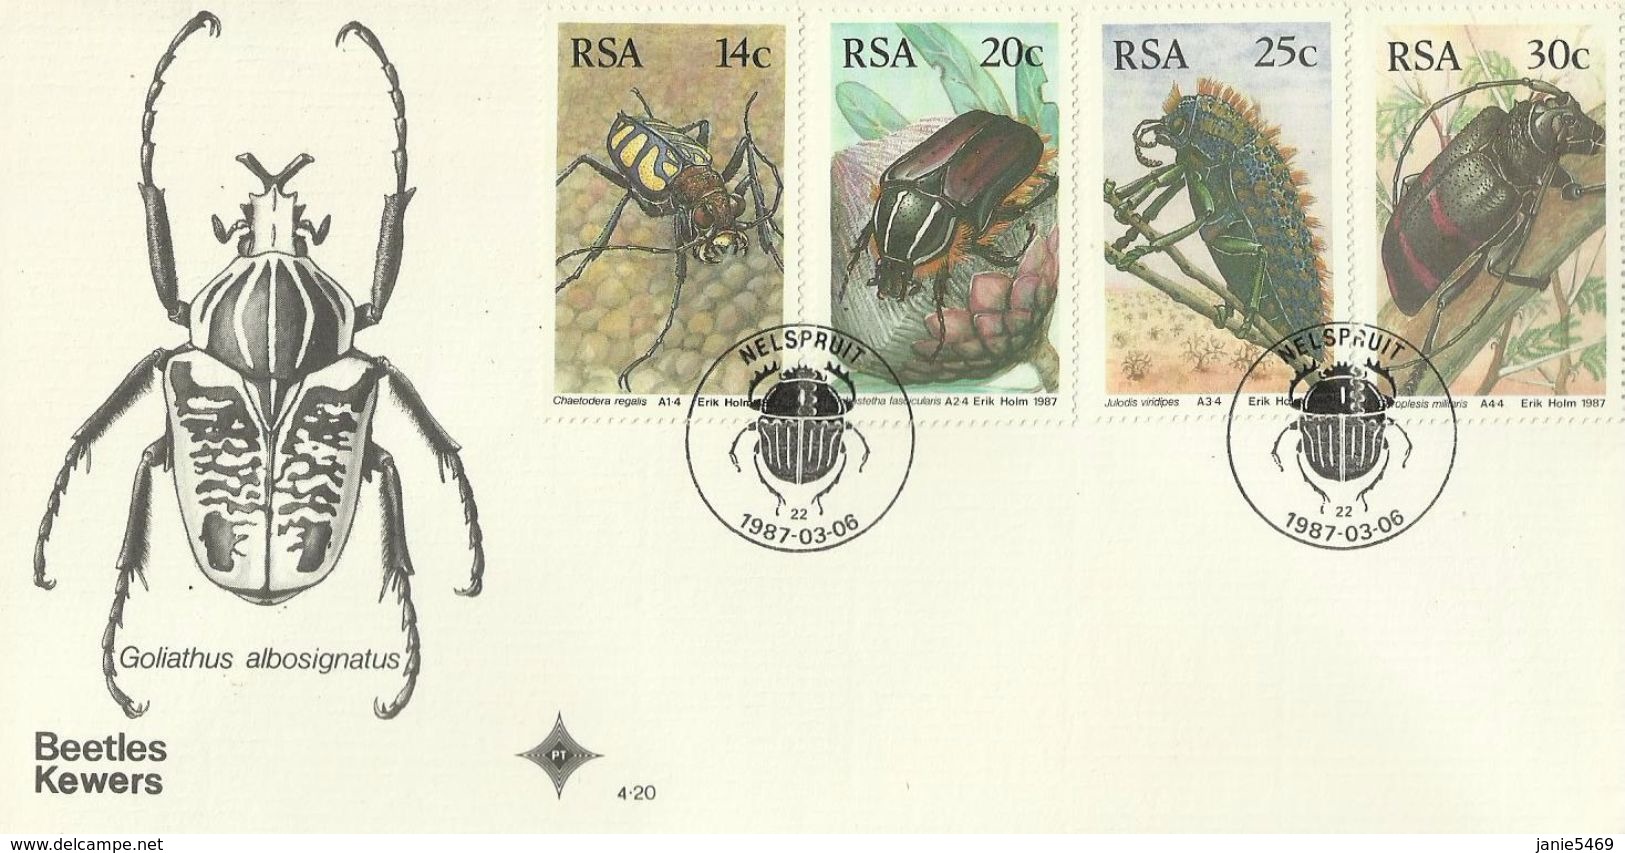 South Africa RSA 1987 Beetles FDC - FDC